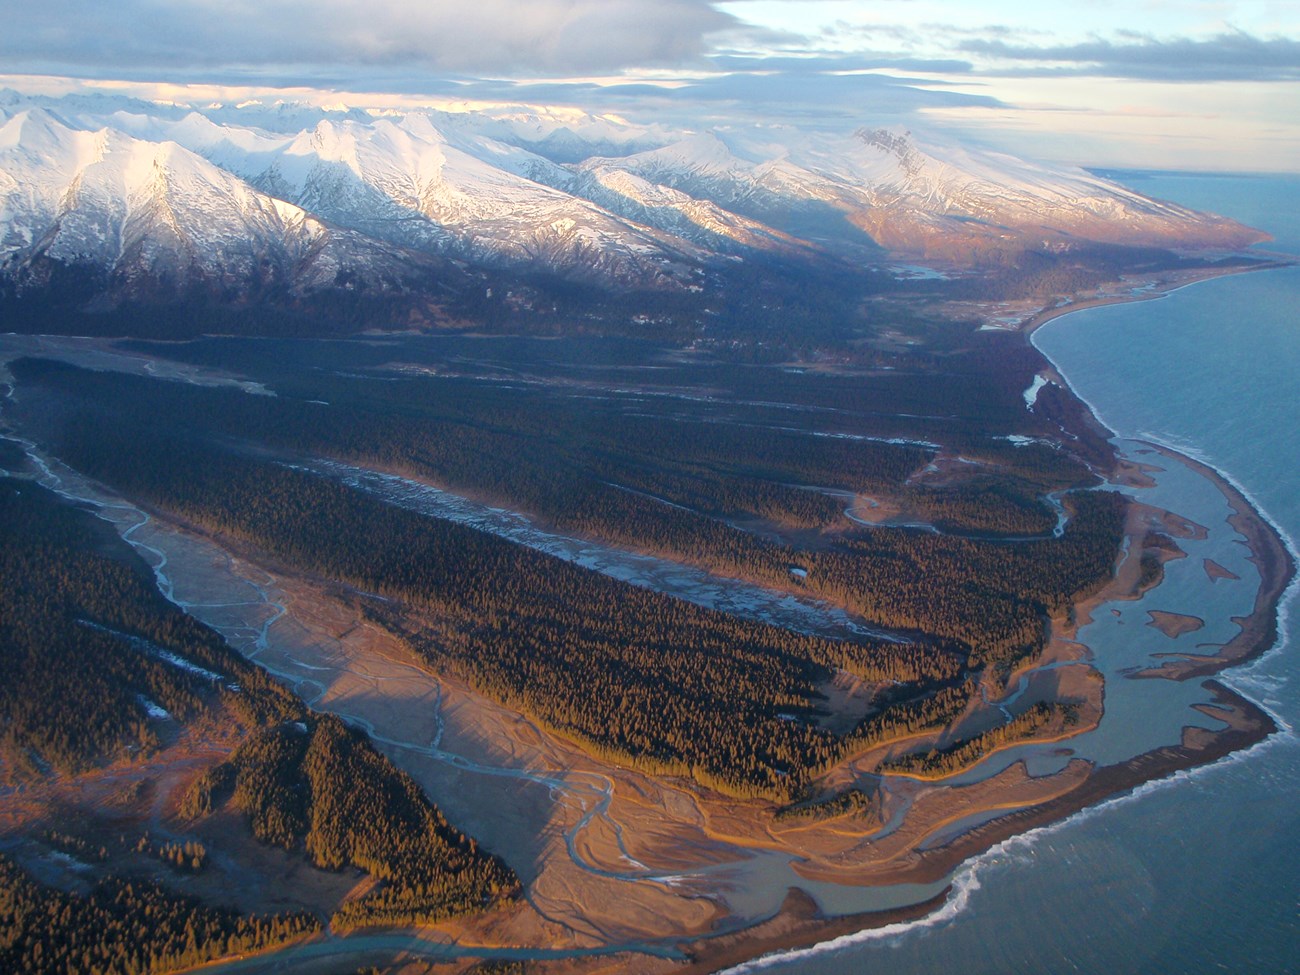 An aerial view of the Red River and mountains near the Lake Clark coast